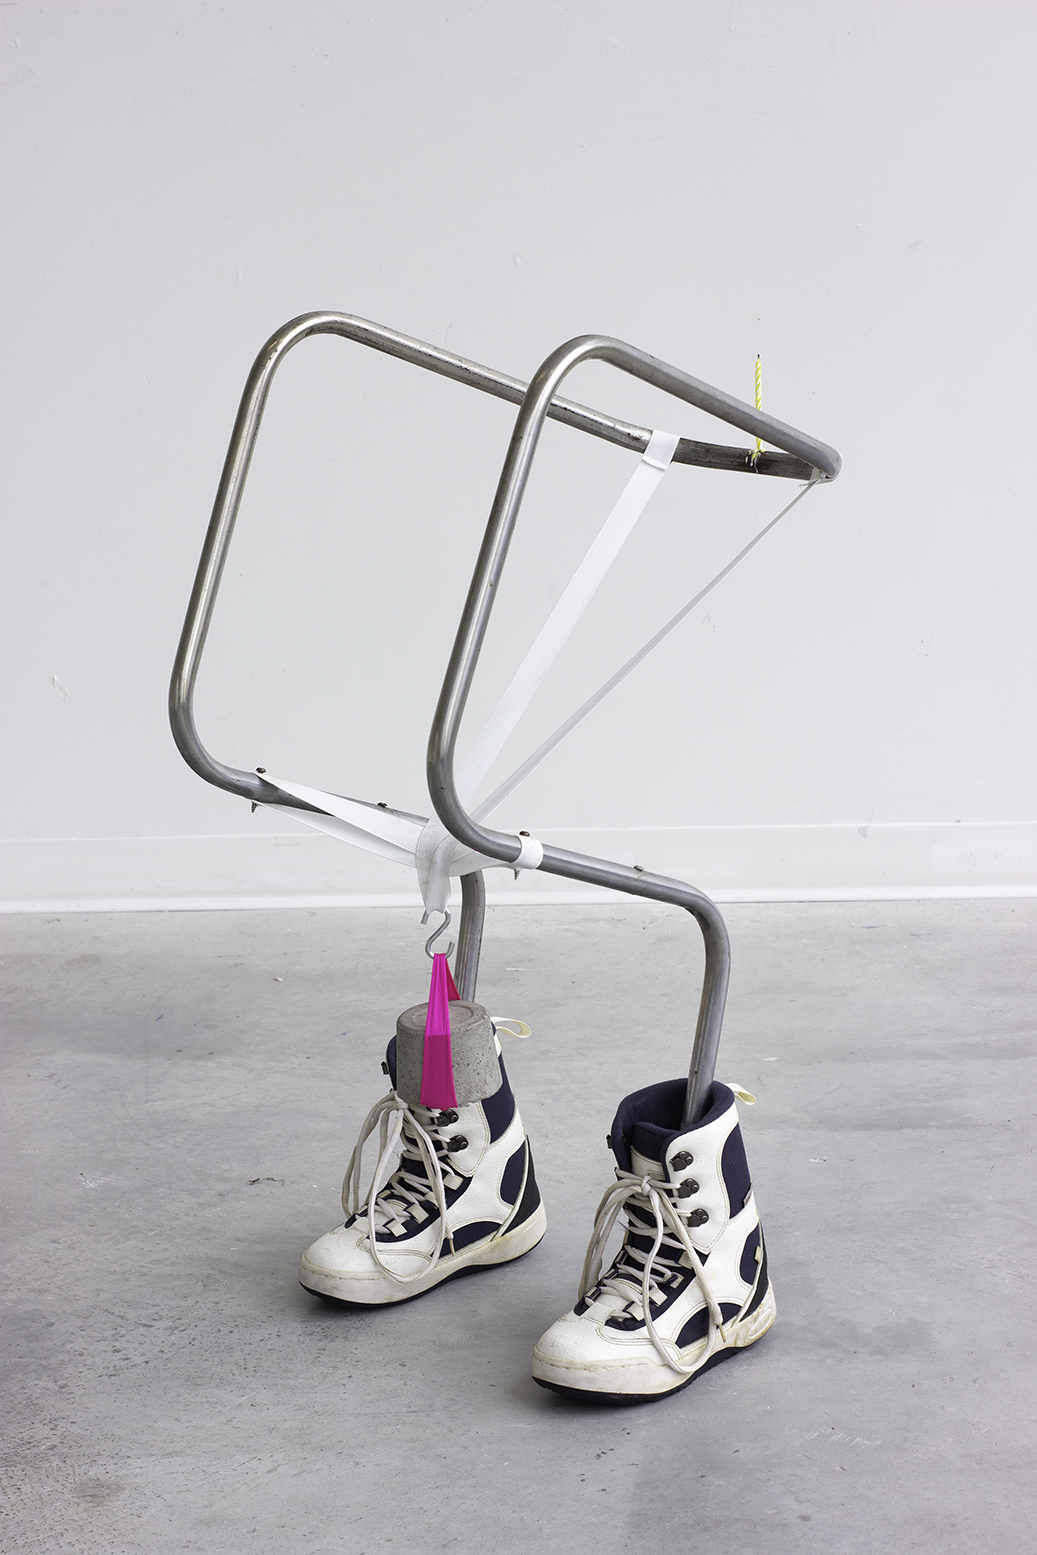 <i>Boots</i> <br> Steel, ski boots, candle, elastic, concrete, sand, 33.5 x 14 x 20 in, 2021.